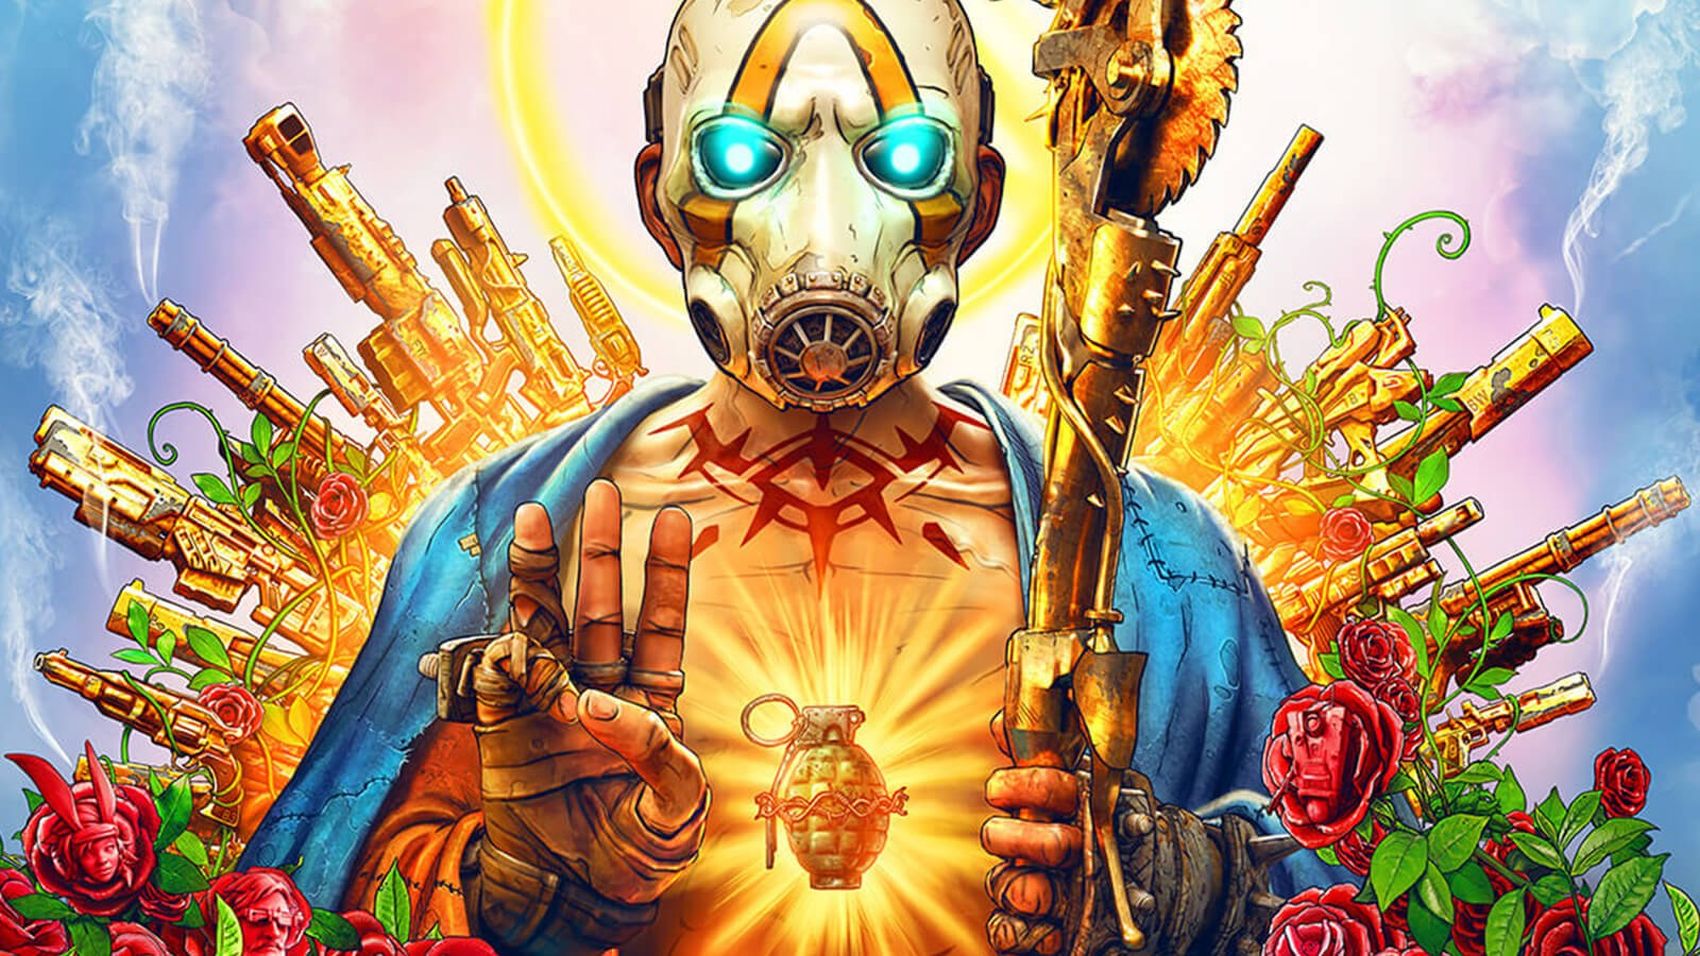 Image for Borderlands 3 is free on the Epic Games Store for the next week